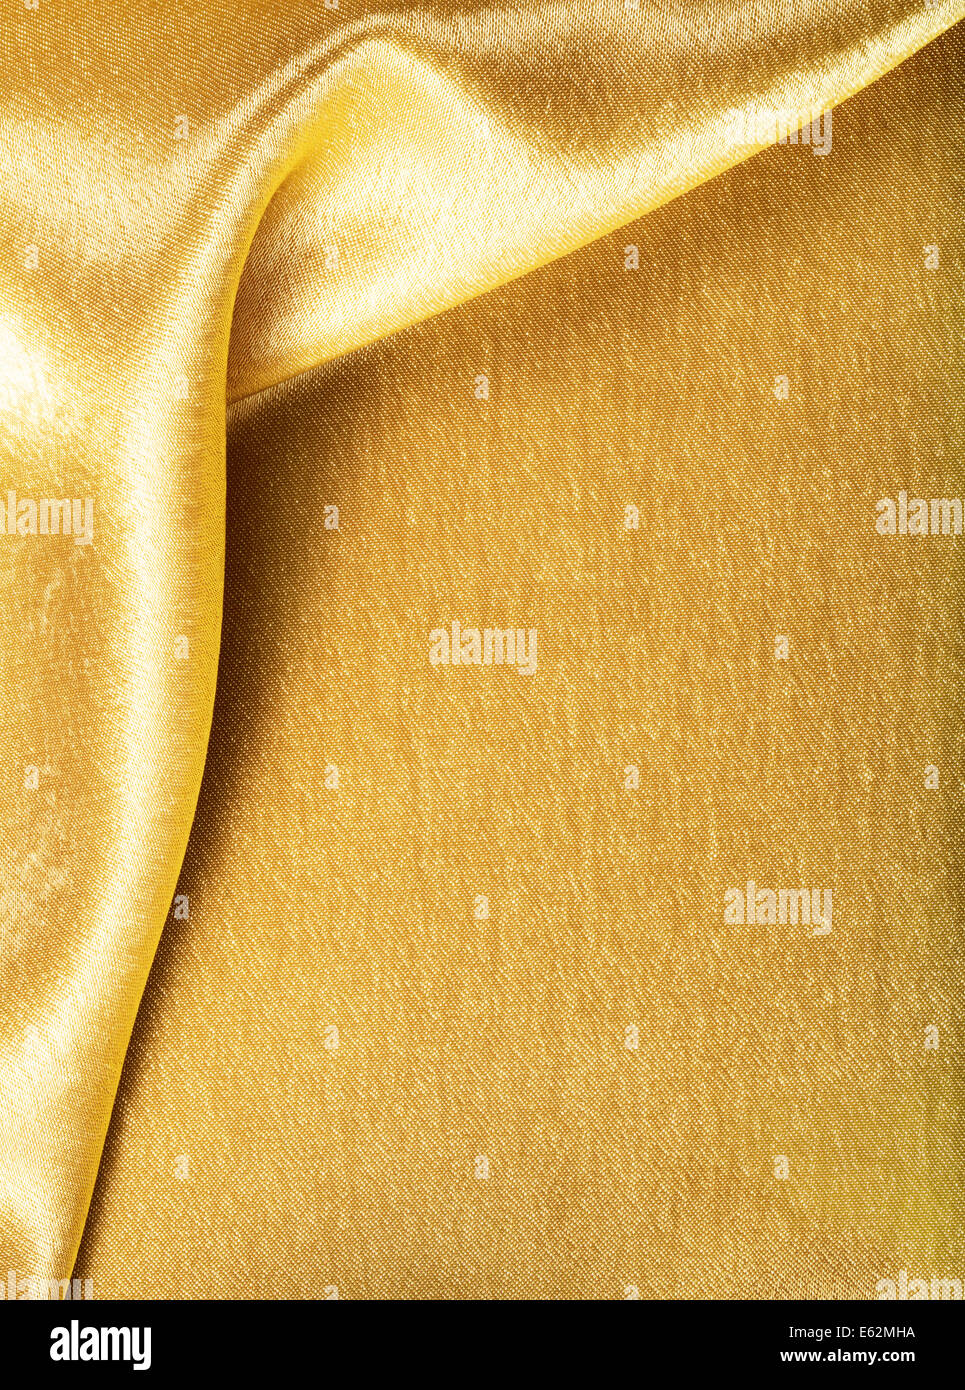 Golden Fabric silk texture for background Stock Photo